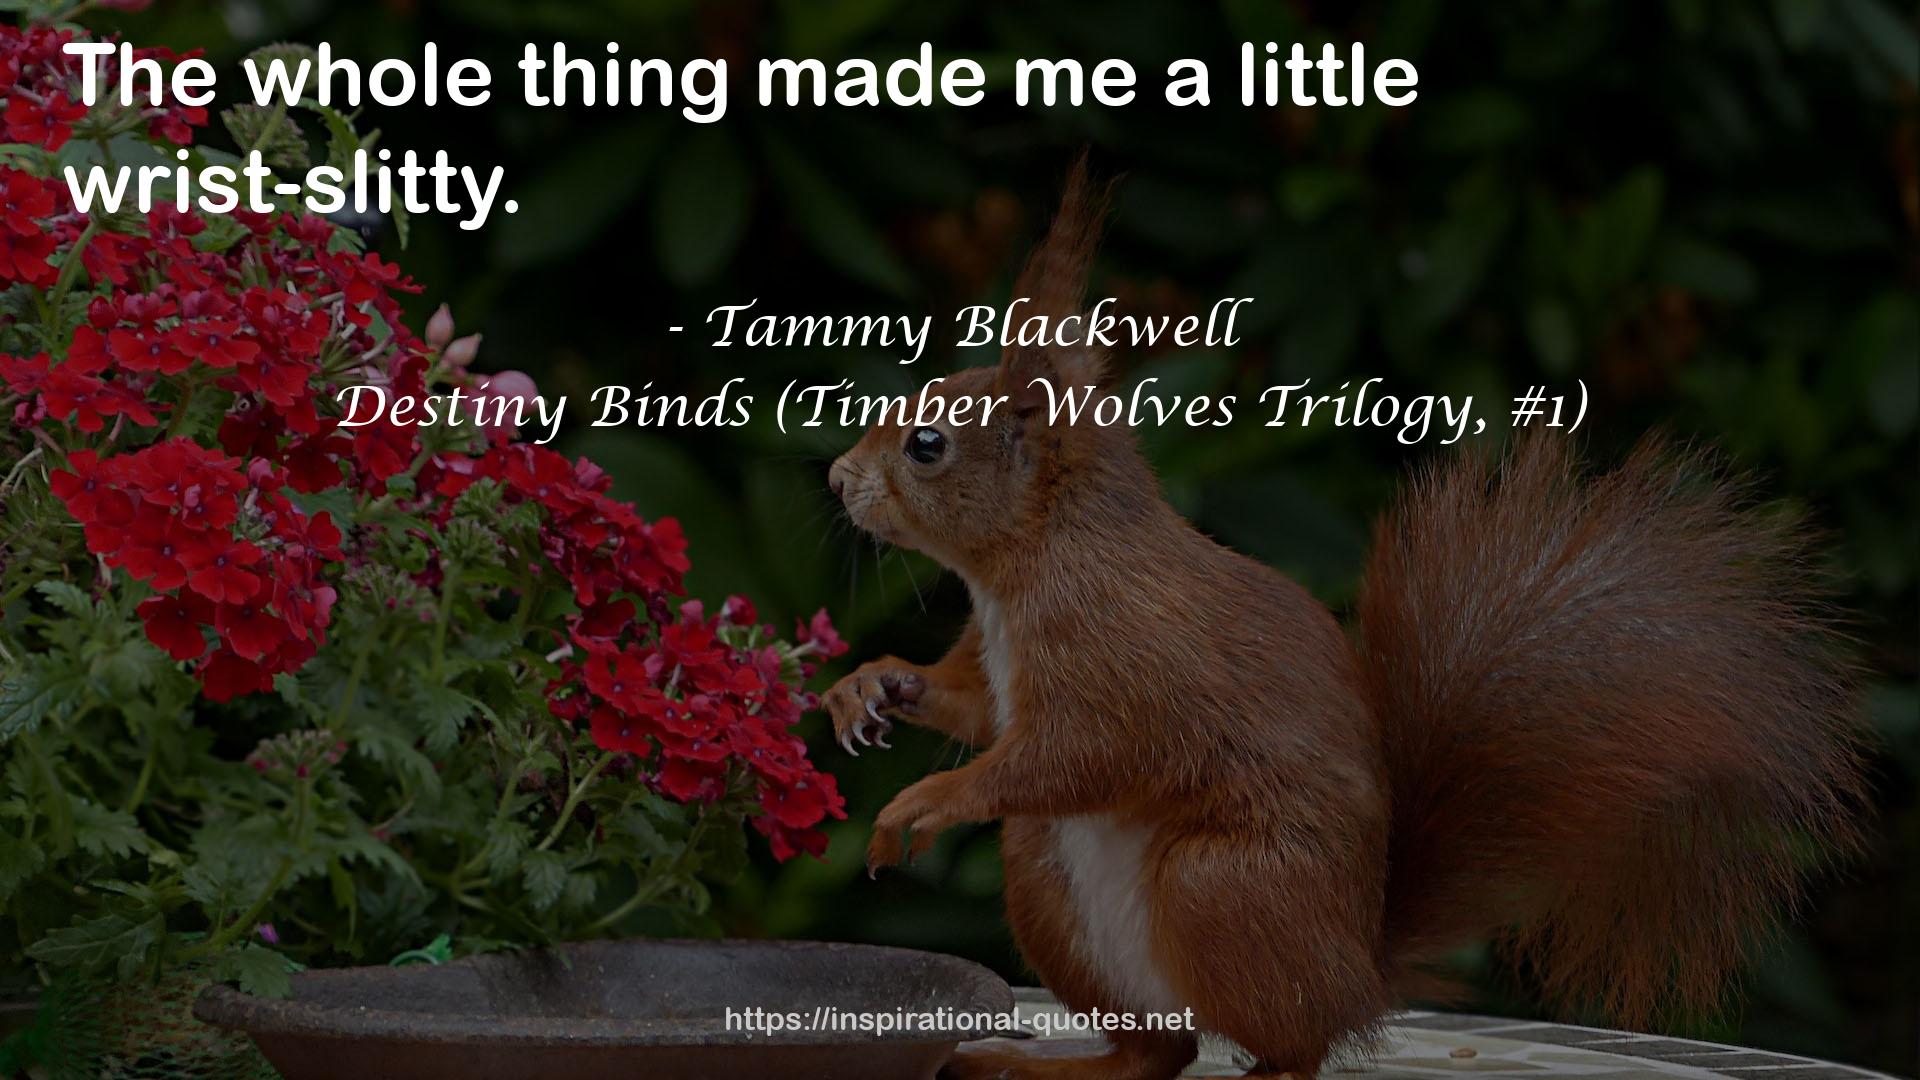 Destiny Binds (Timber Wolves Trilogy, #1) QUOTES